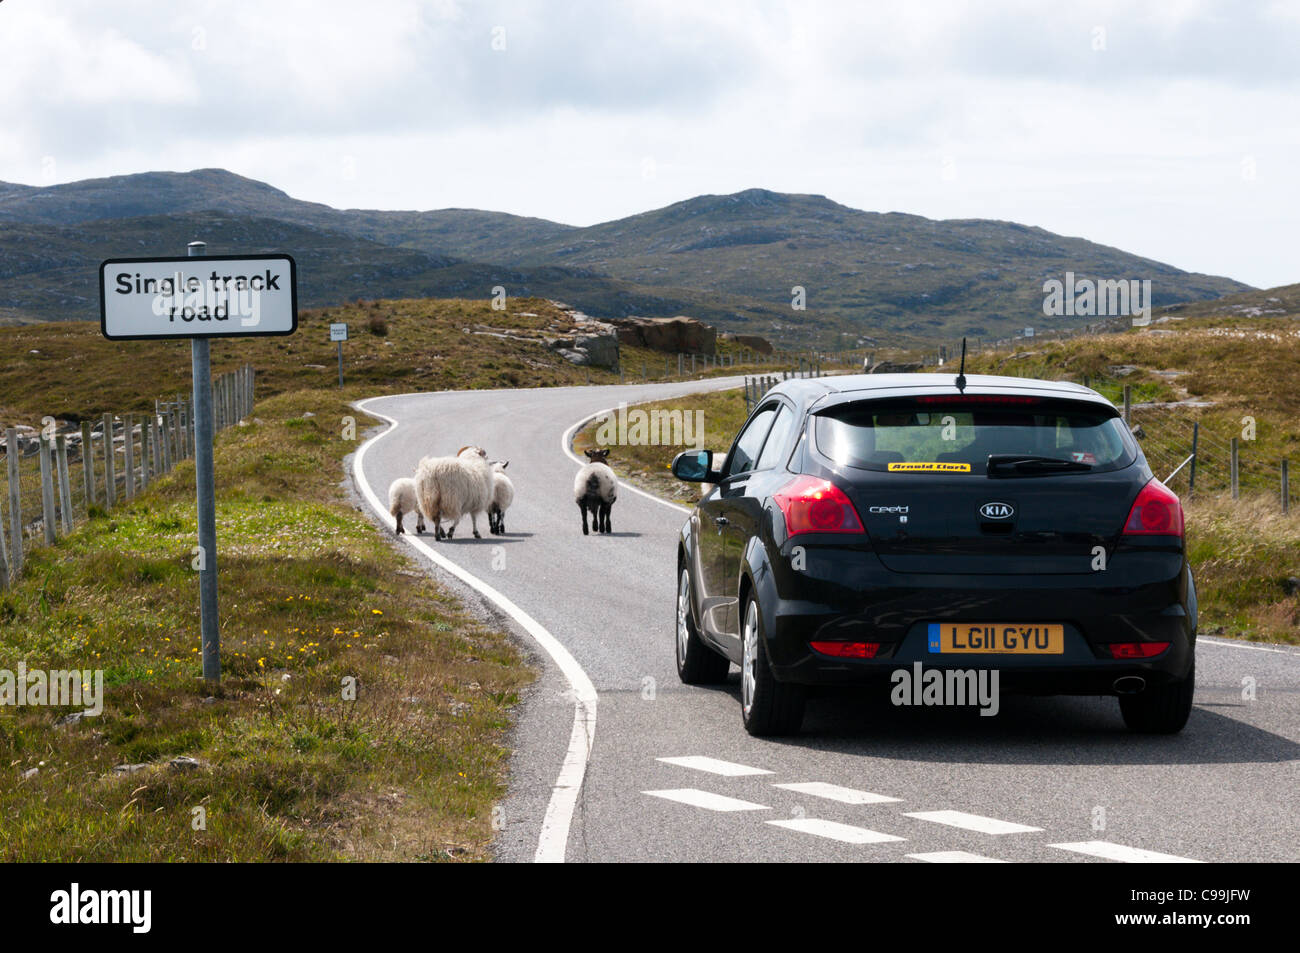 Sheep walking along a single track road in front of a car in Scotland. Stock Photo